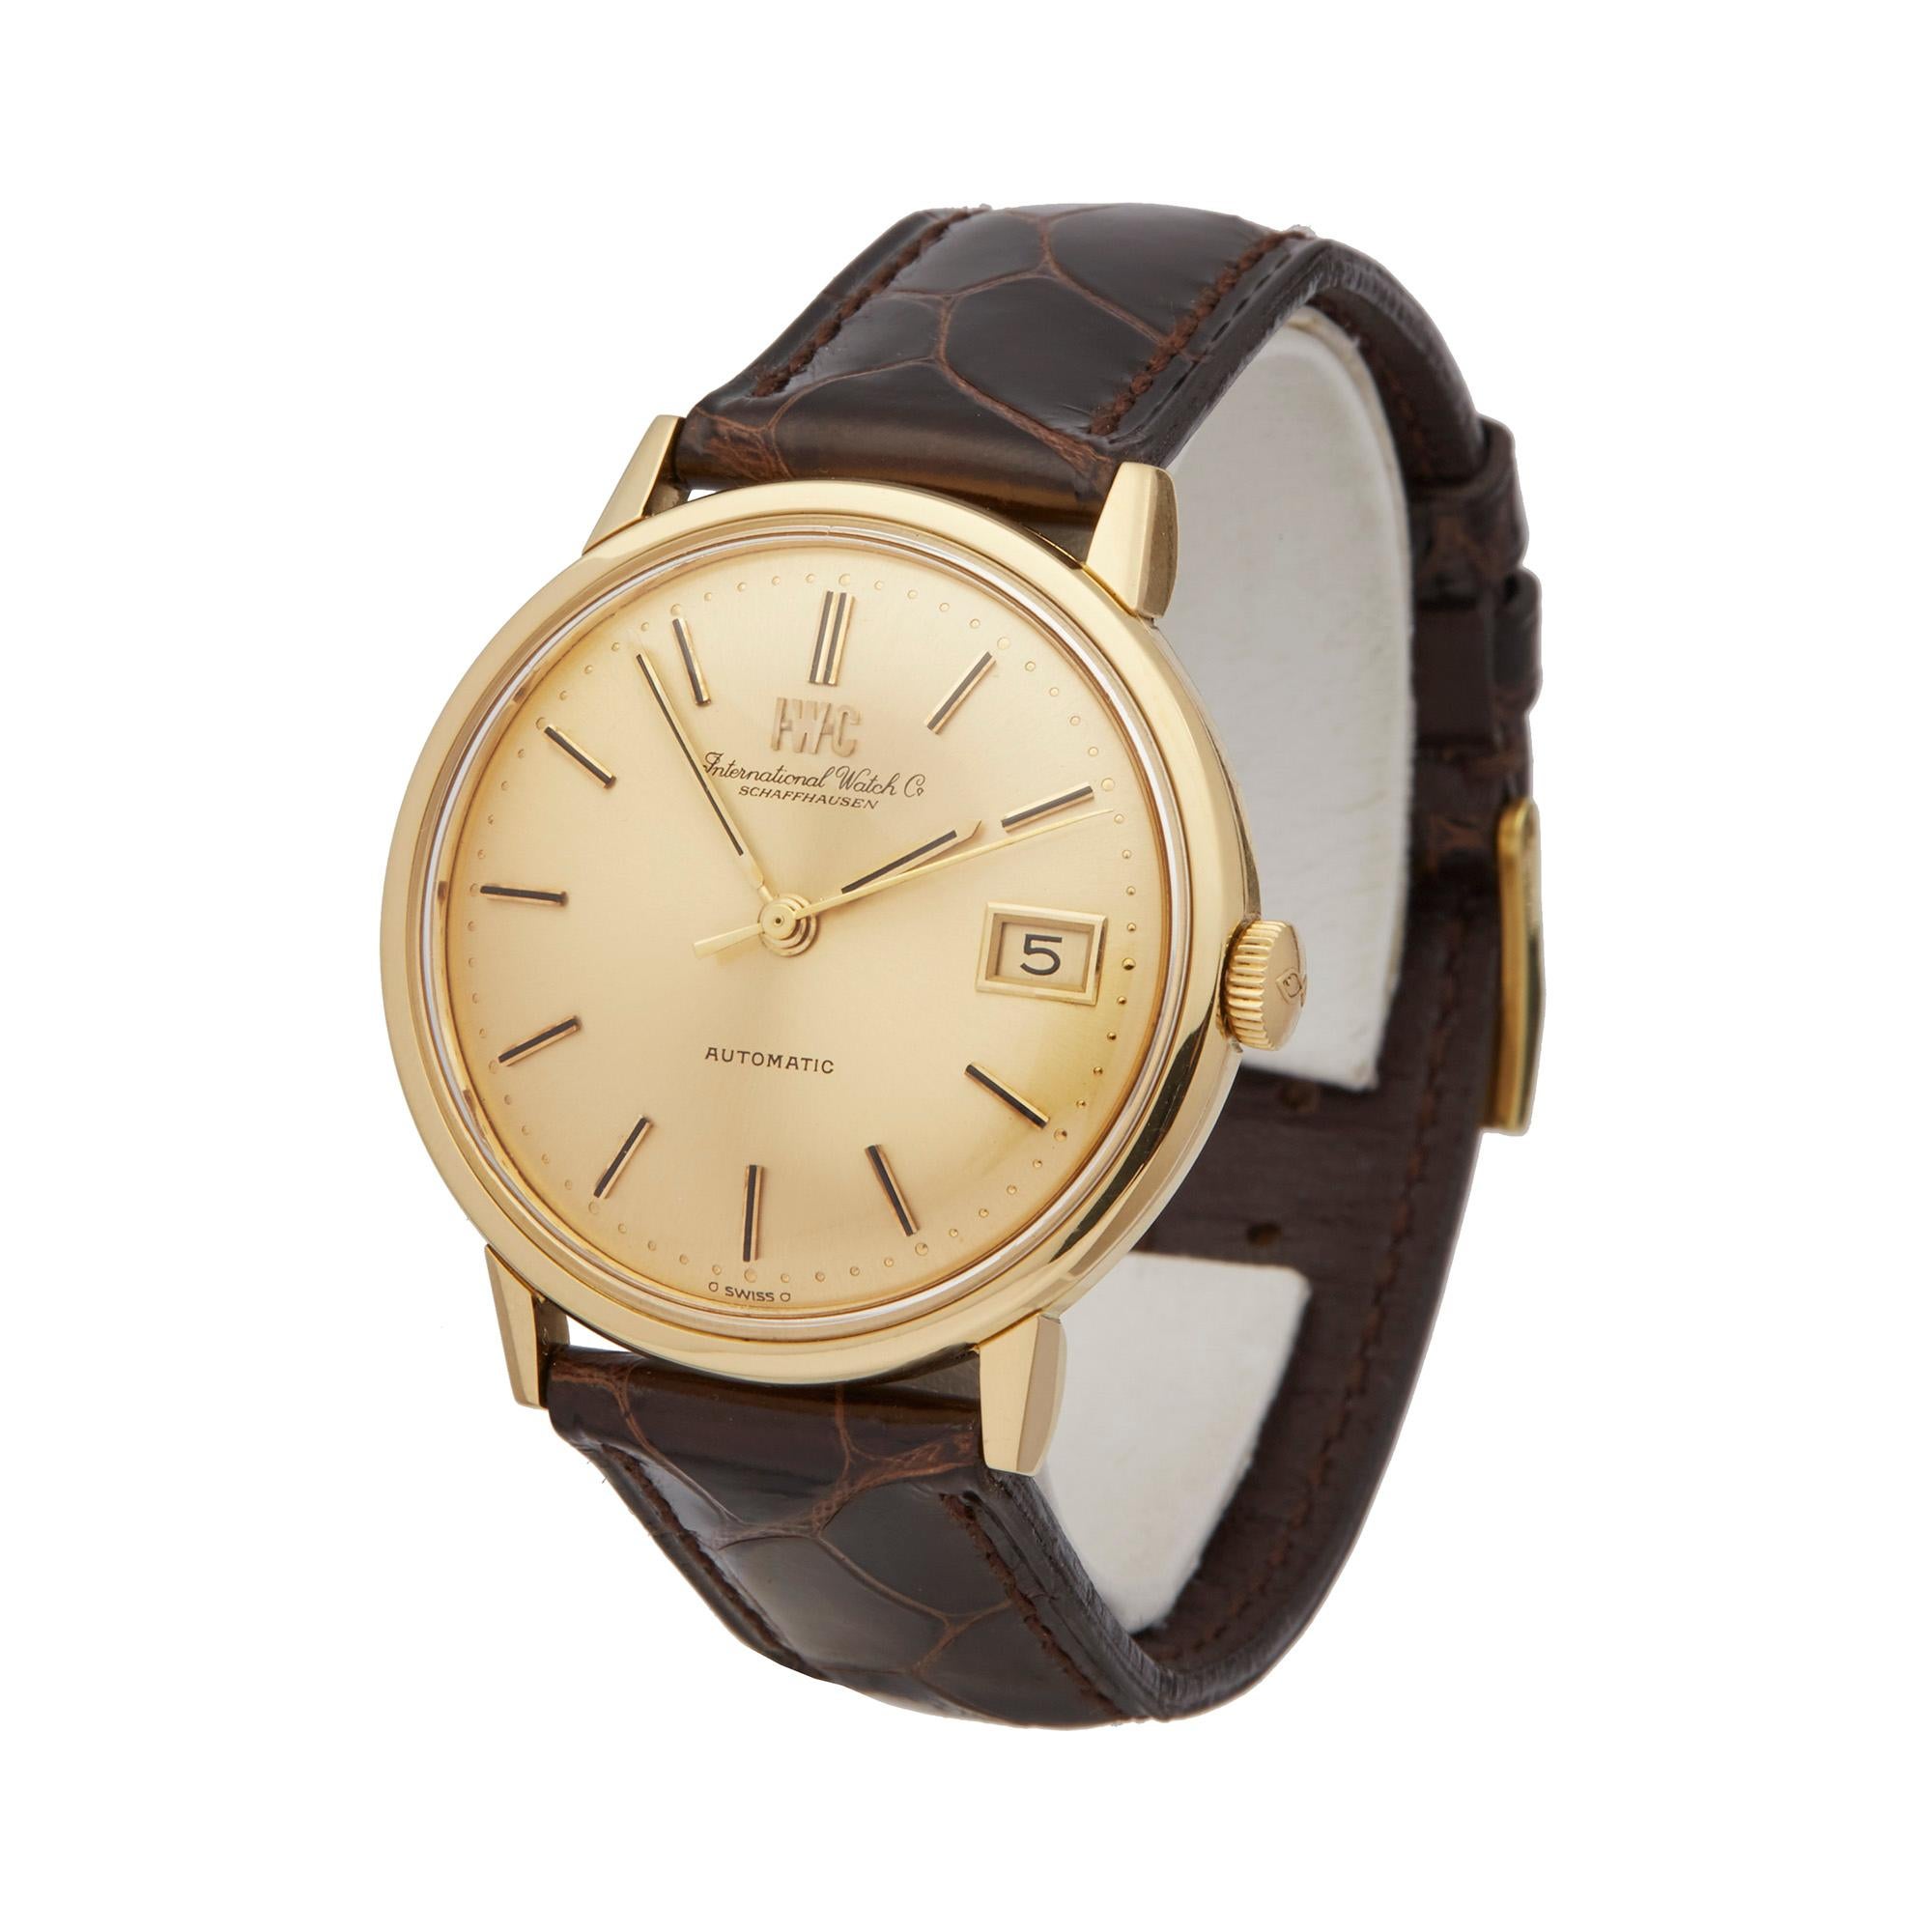 Reference: COM1967
Manufacturer: IWC
Model: Cal.8541
Model Reference: Cal.8541
Age: Circa 1970's
Gender: Men's
Box and Papers: Box only
Dial: Champagne Baton
Glass: Plexiglass
Movement: Automatic
Water Resistance: To Manufacturers